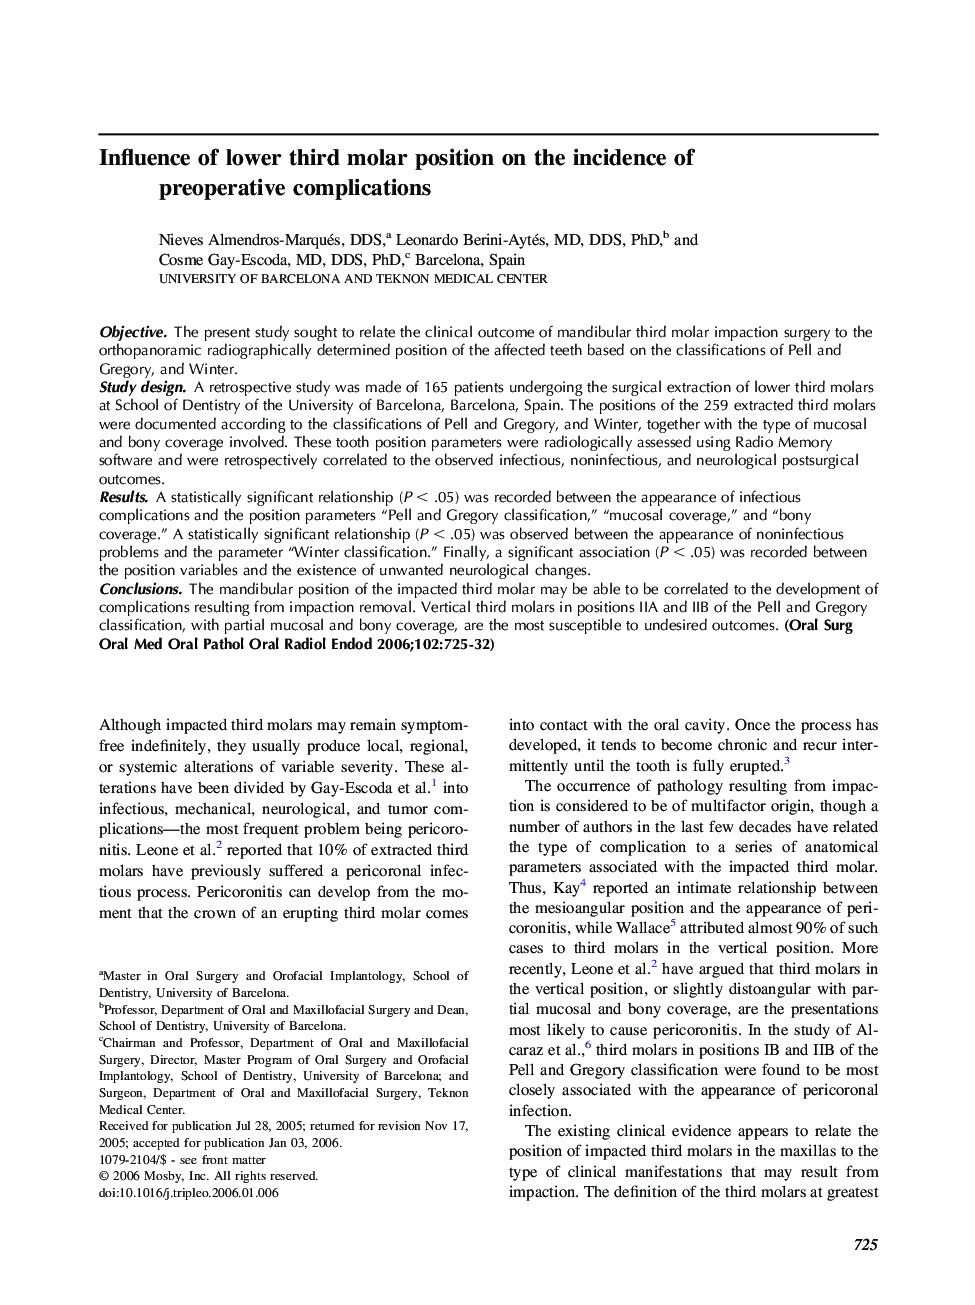 Influence of lower third molar position on the incidence of preoperative complications